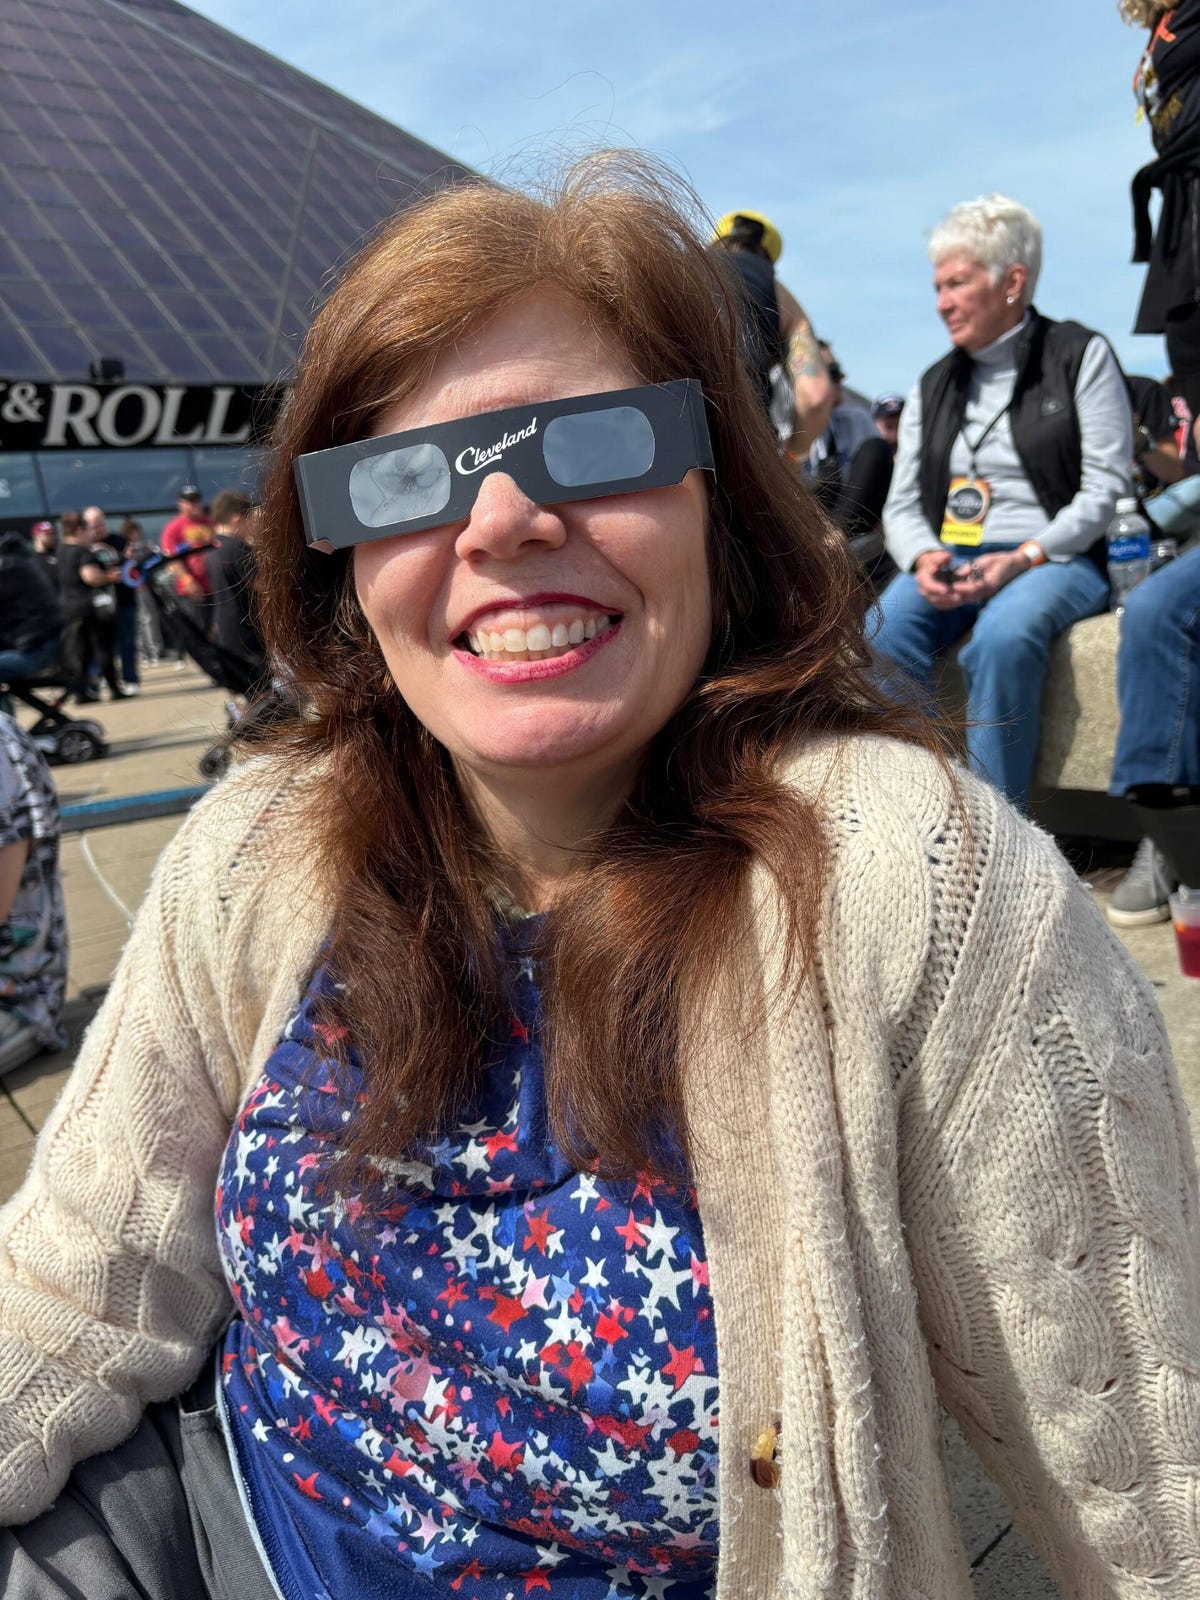 Author at the Rock and Roll Hall of Fame in Cleveland, wearing eclipse glasses